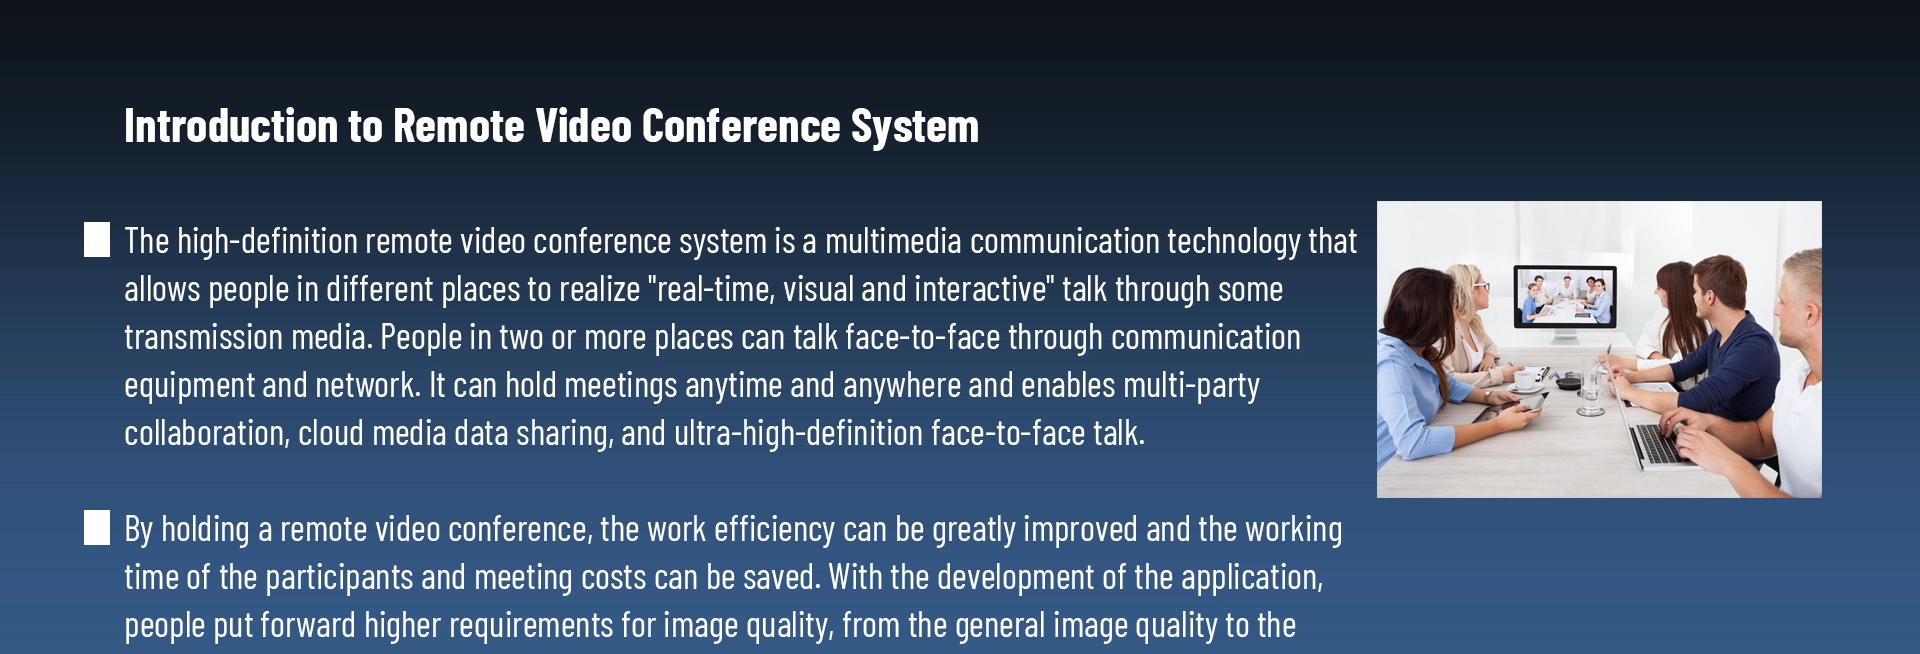 HD Video Conference MCU (9 channels)